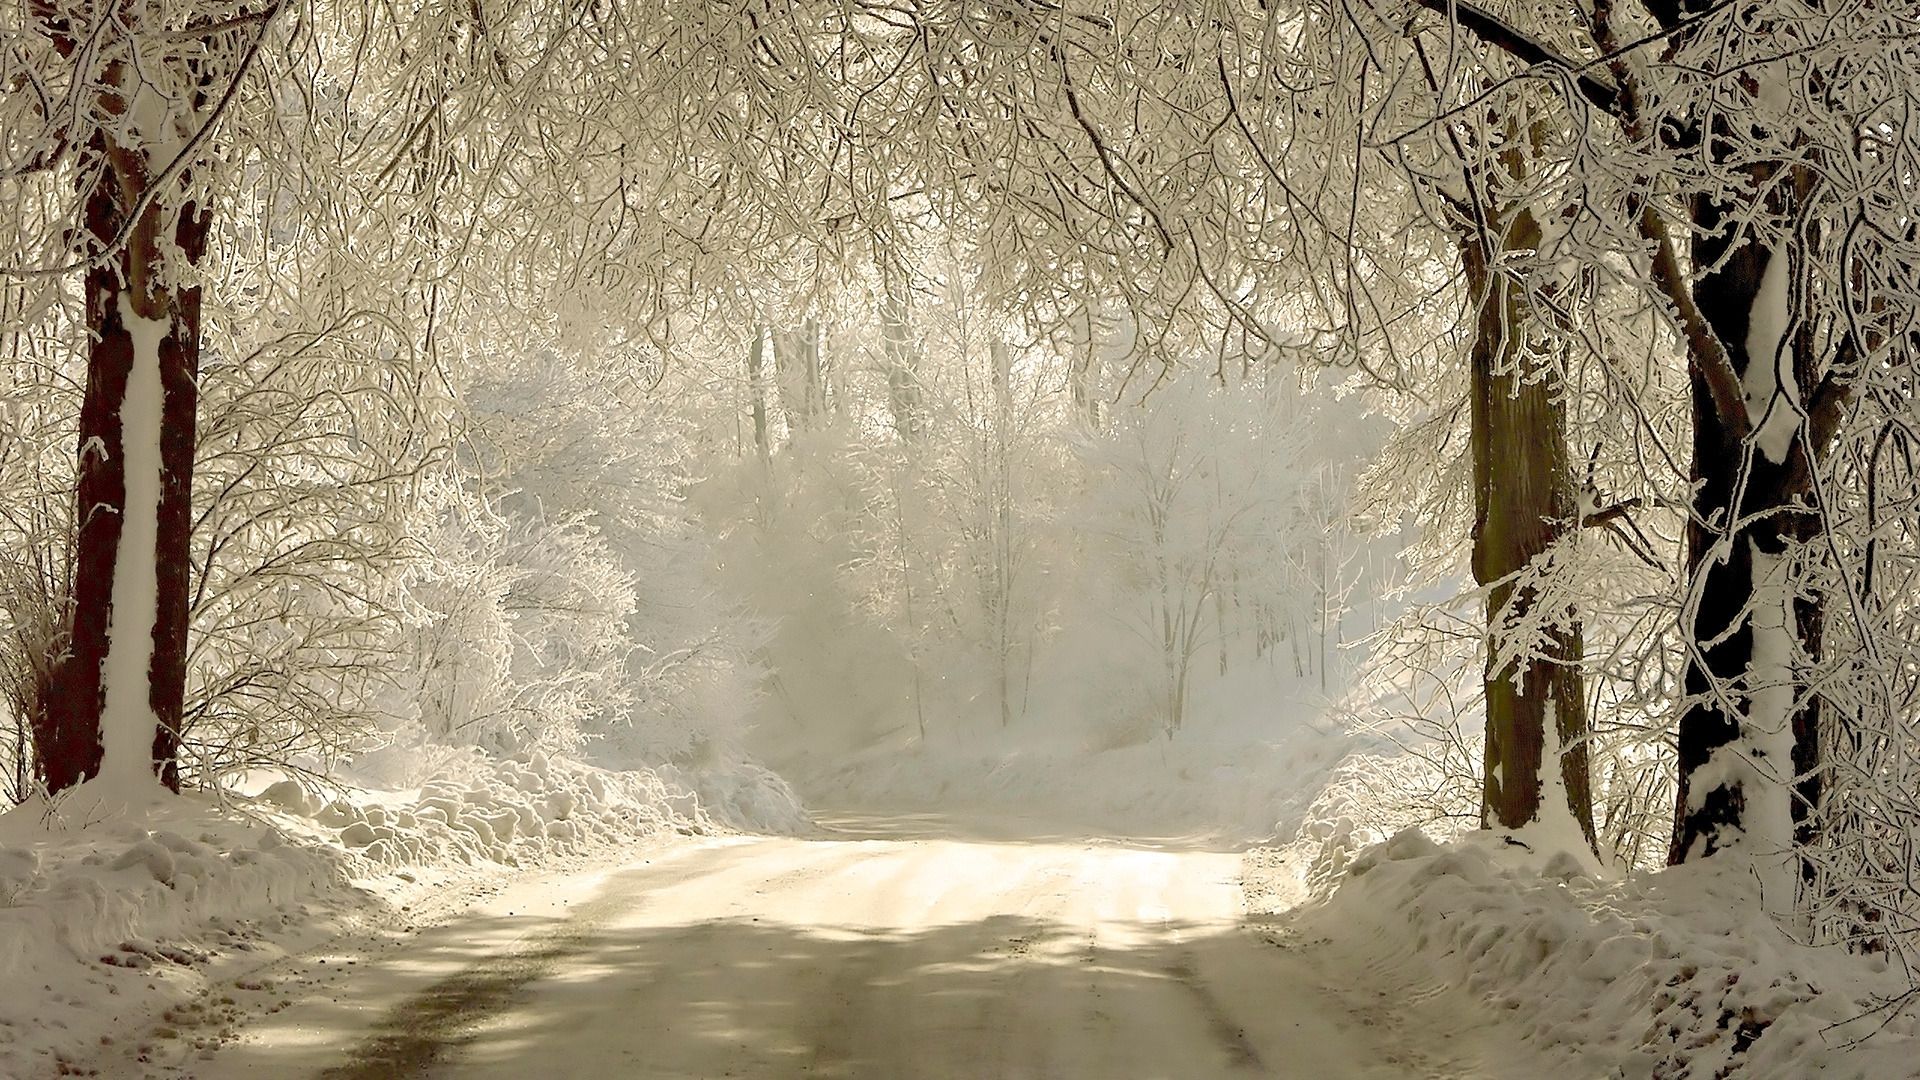 Download Wallpaper 1920x1080 road, snow, trees, hoarfrost, gray